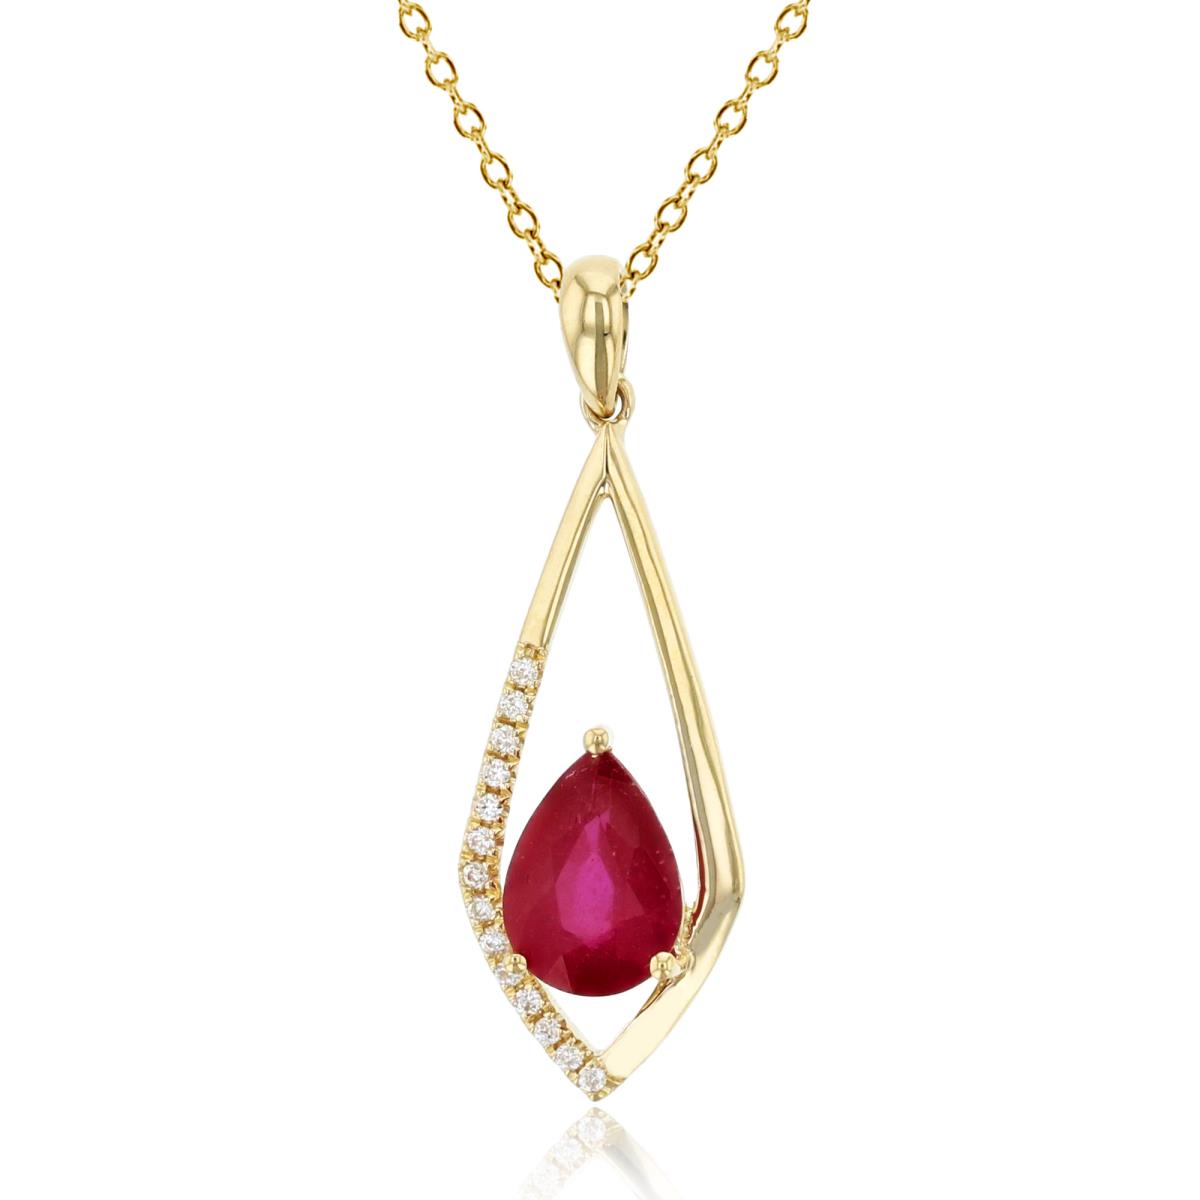 10K Yellow Gold 0.07 CTTW Diamond & 7x5mm PS Glass Filled Ruby Open Rhomb Dangling 18"Necklace